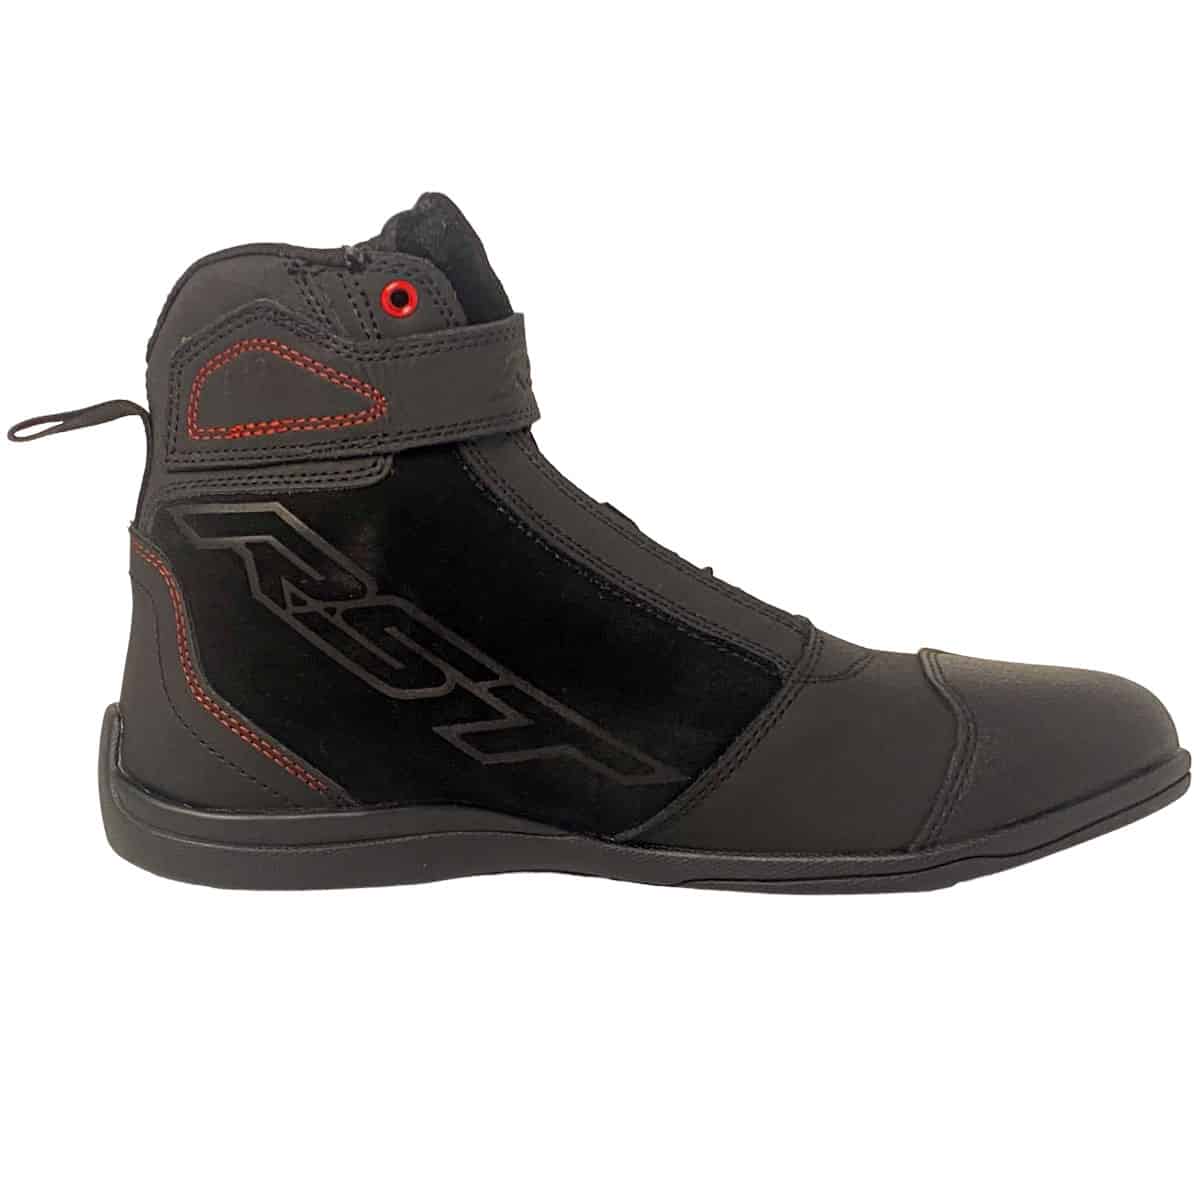 RST Frontier CE Boots: Breathable summer motorcycle boots - inside view